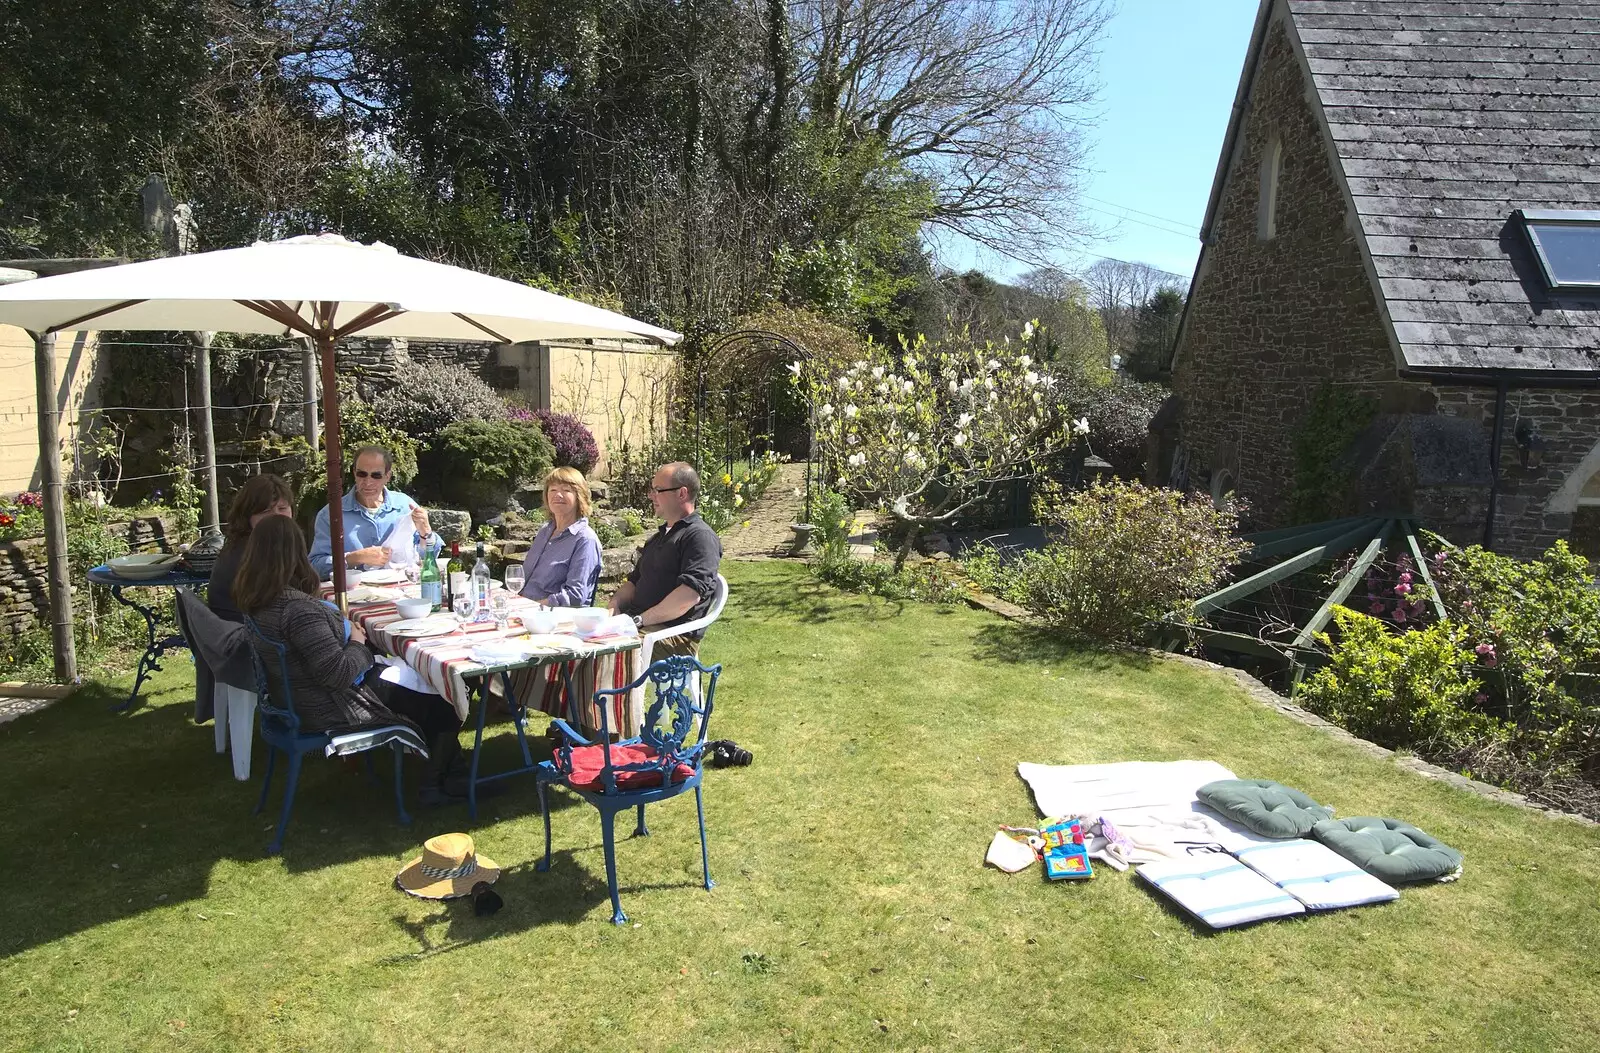 Garden lunch: even Dartmoor has nice weather, from An Easter Weekend in Chagford, Devon - 12th April 2009